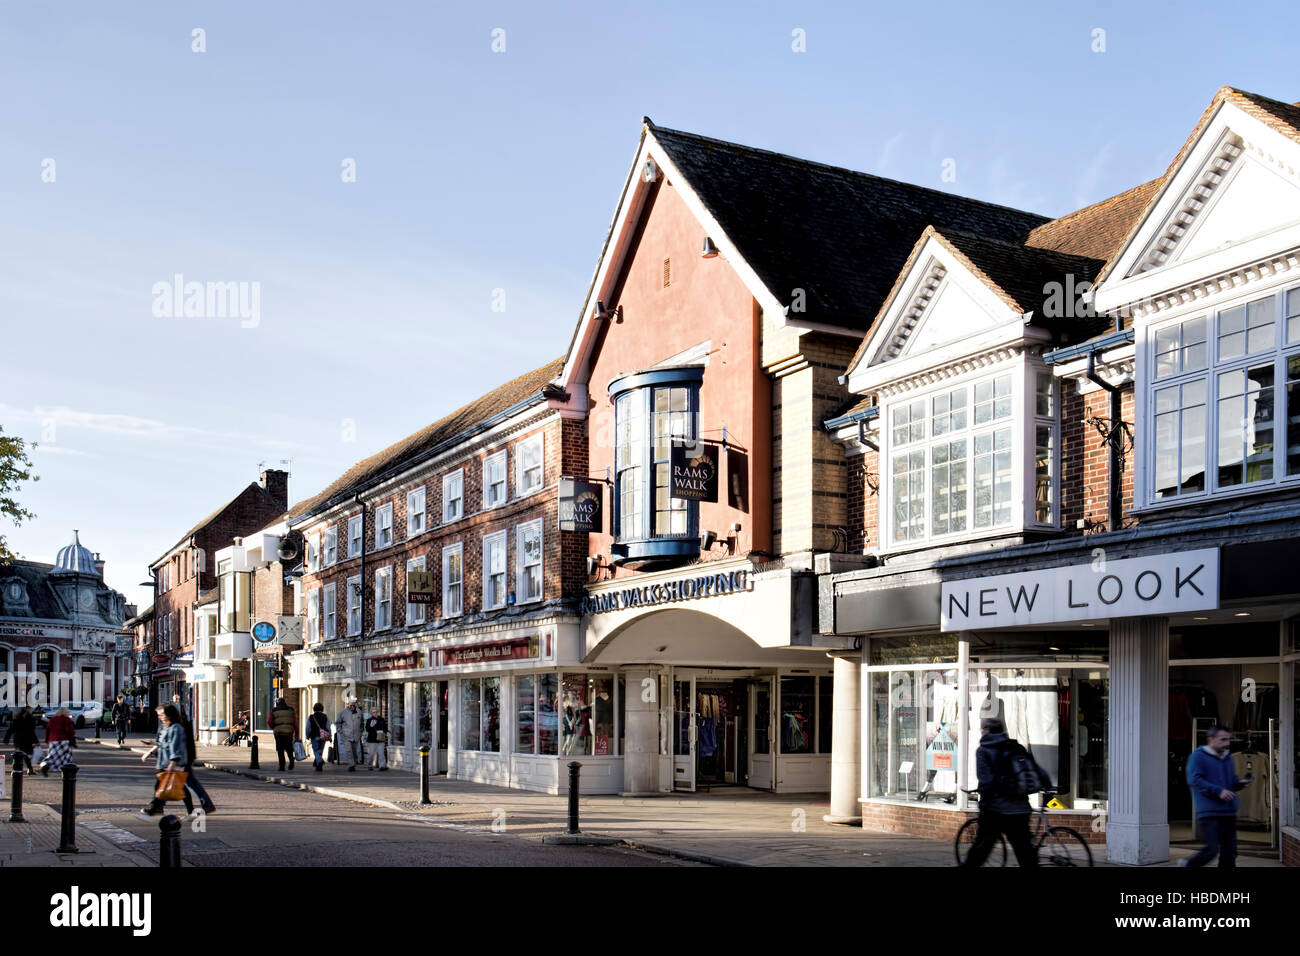 General view of High Street, featuring Rams Walk shopping arcade, Petersfield, a market town in Hampshire, England, UK Stock Photo